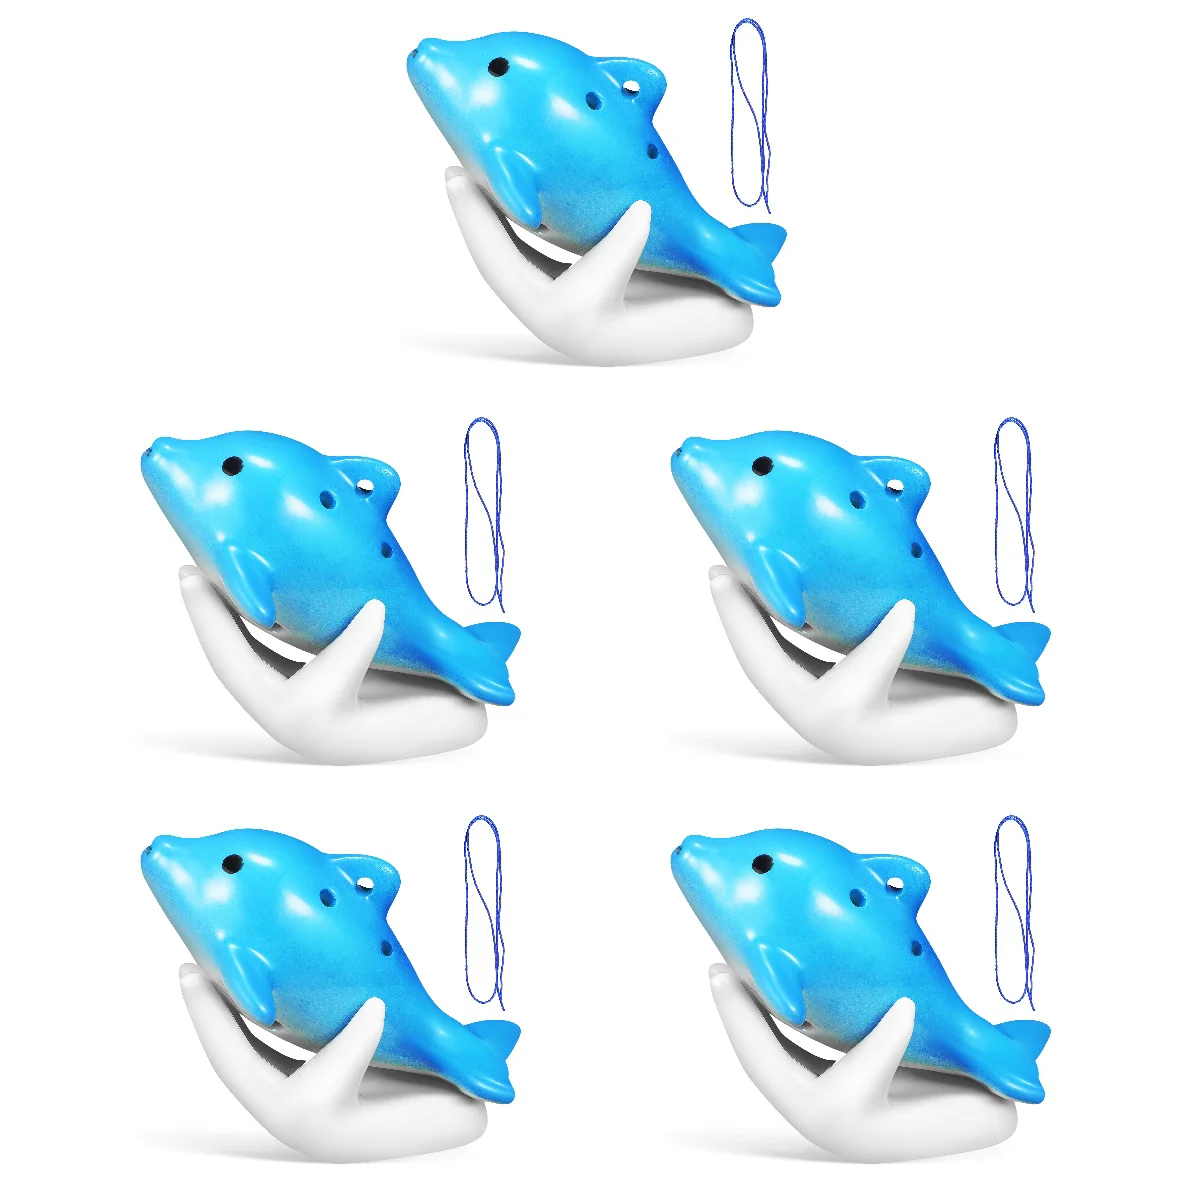 

5pcs Dolphin Shaped Ocarina 6 Holes Alto Ocarina Music Instrument with Hand Rest Song Book Neck Strap for Beginner